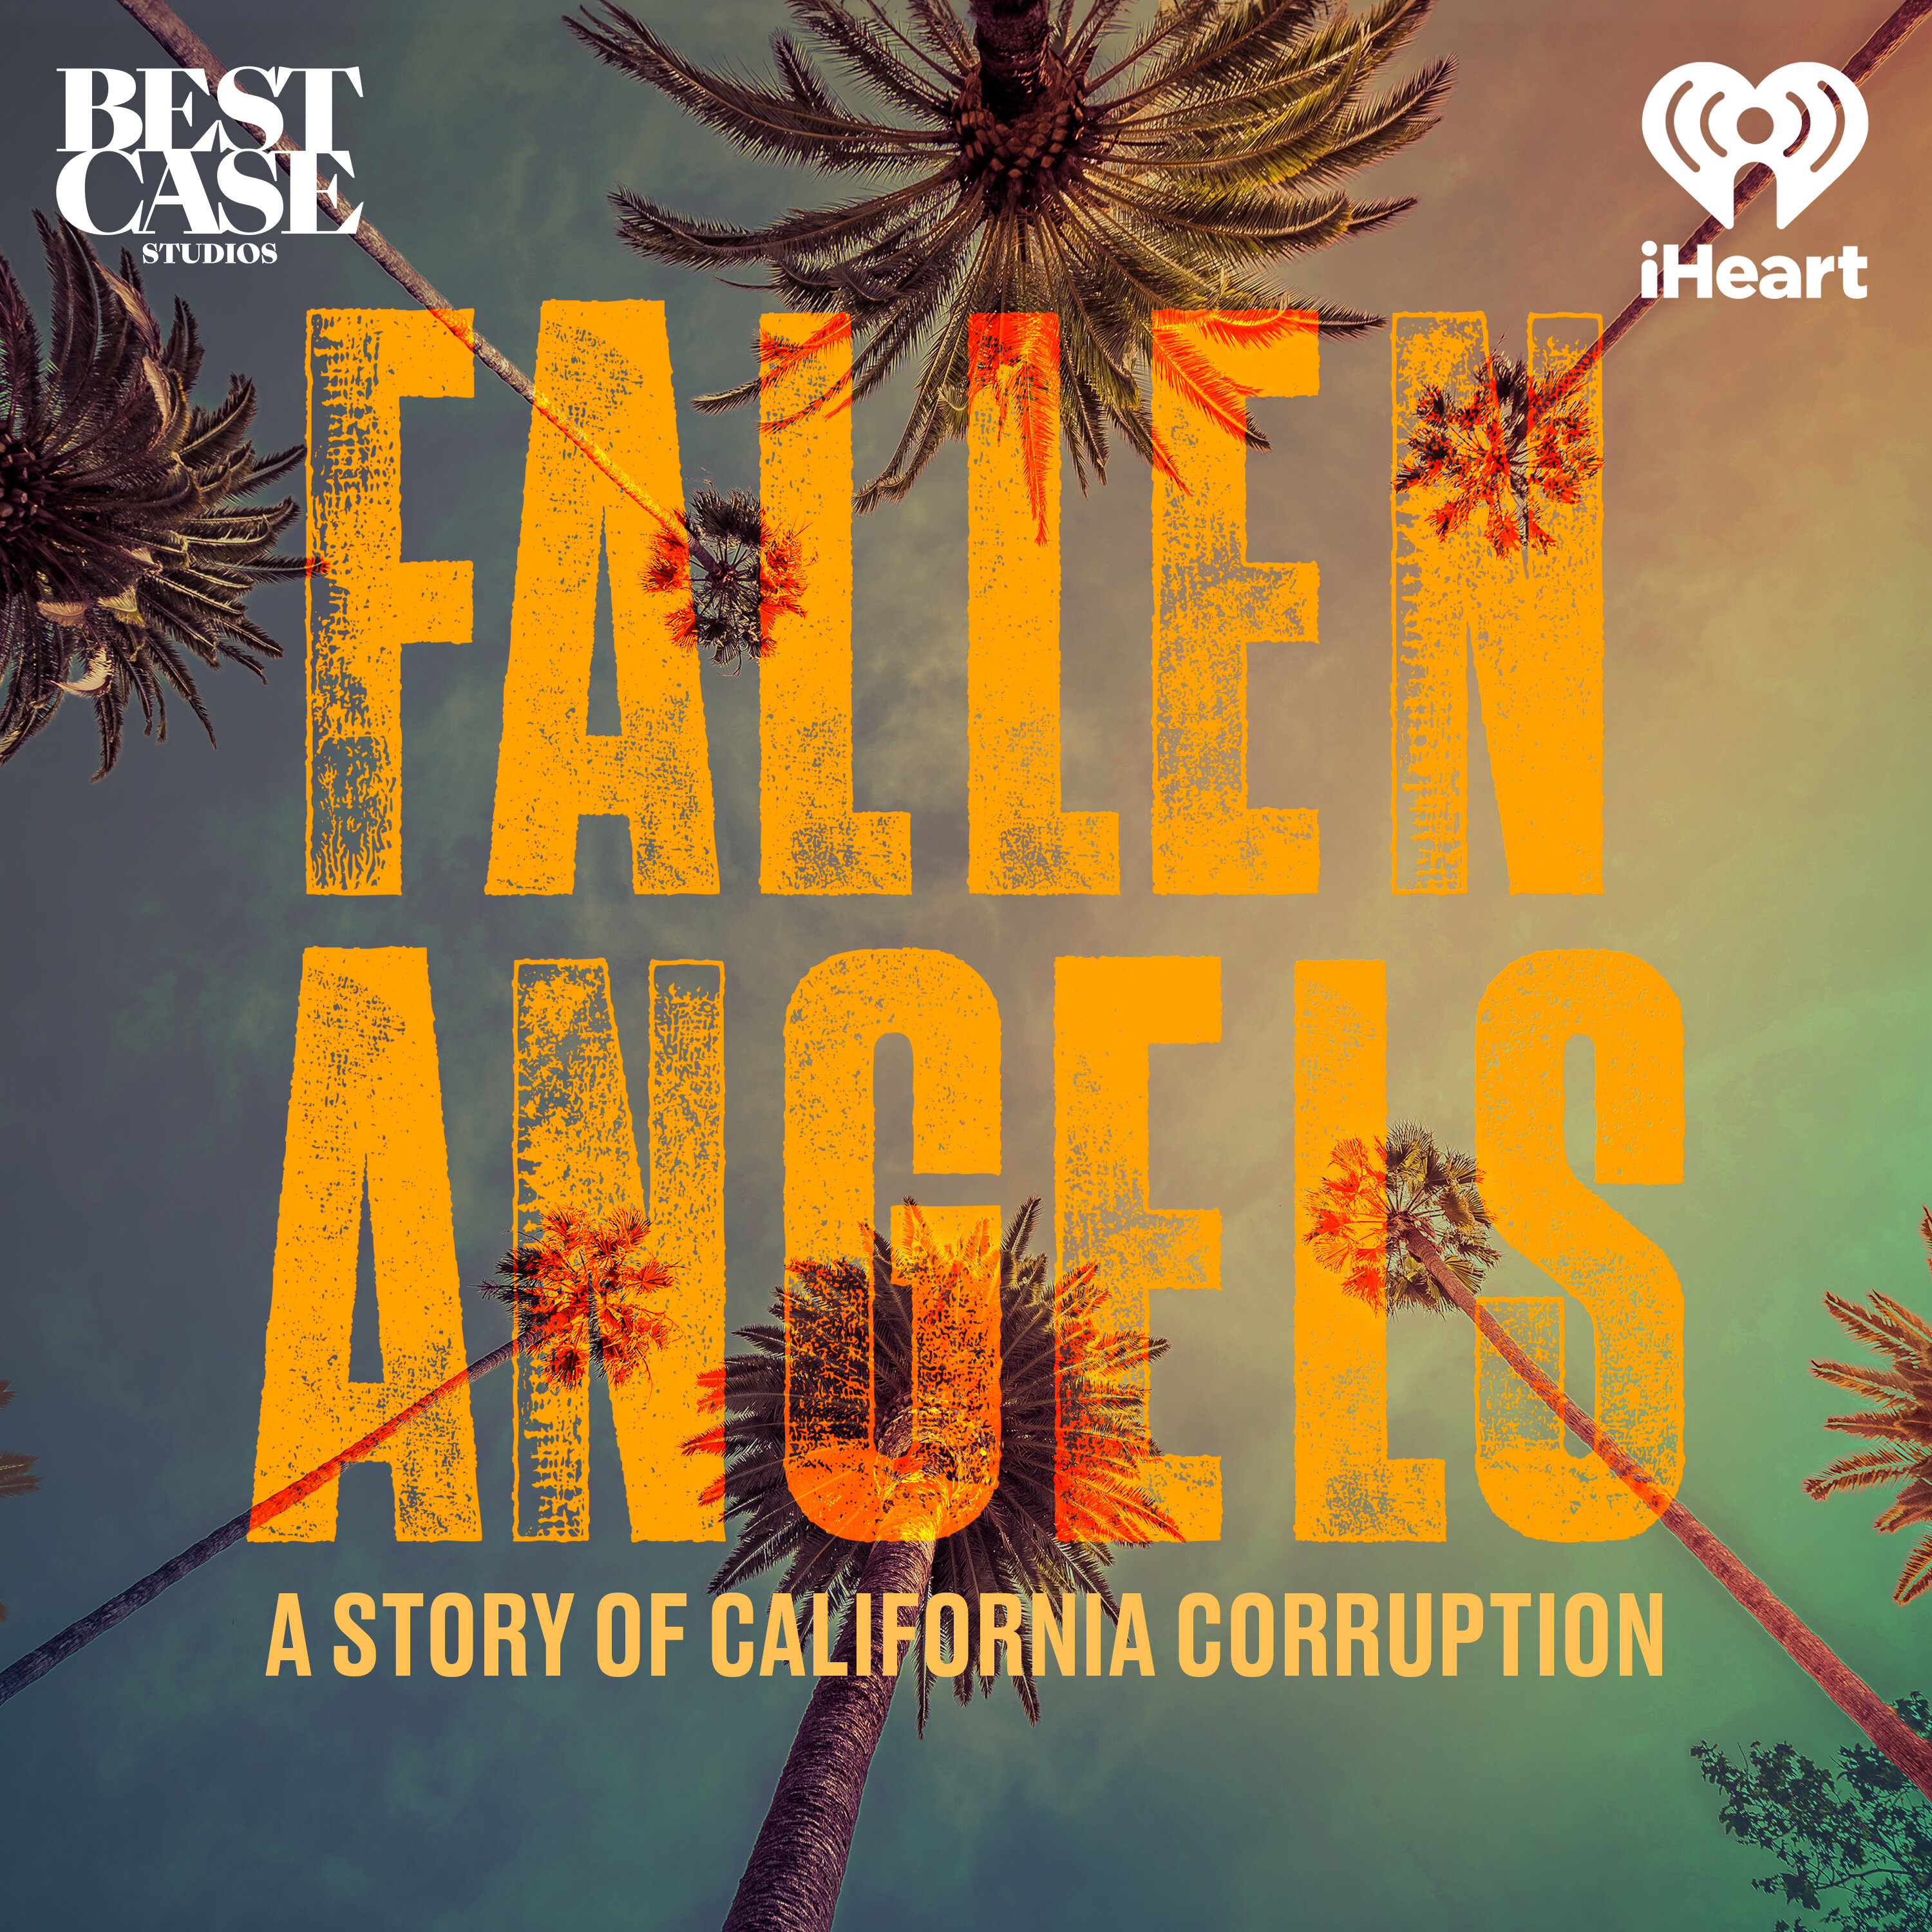 Fallen Angels: A Story of California Corruption by iHeartPodcasts